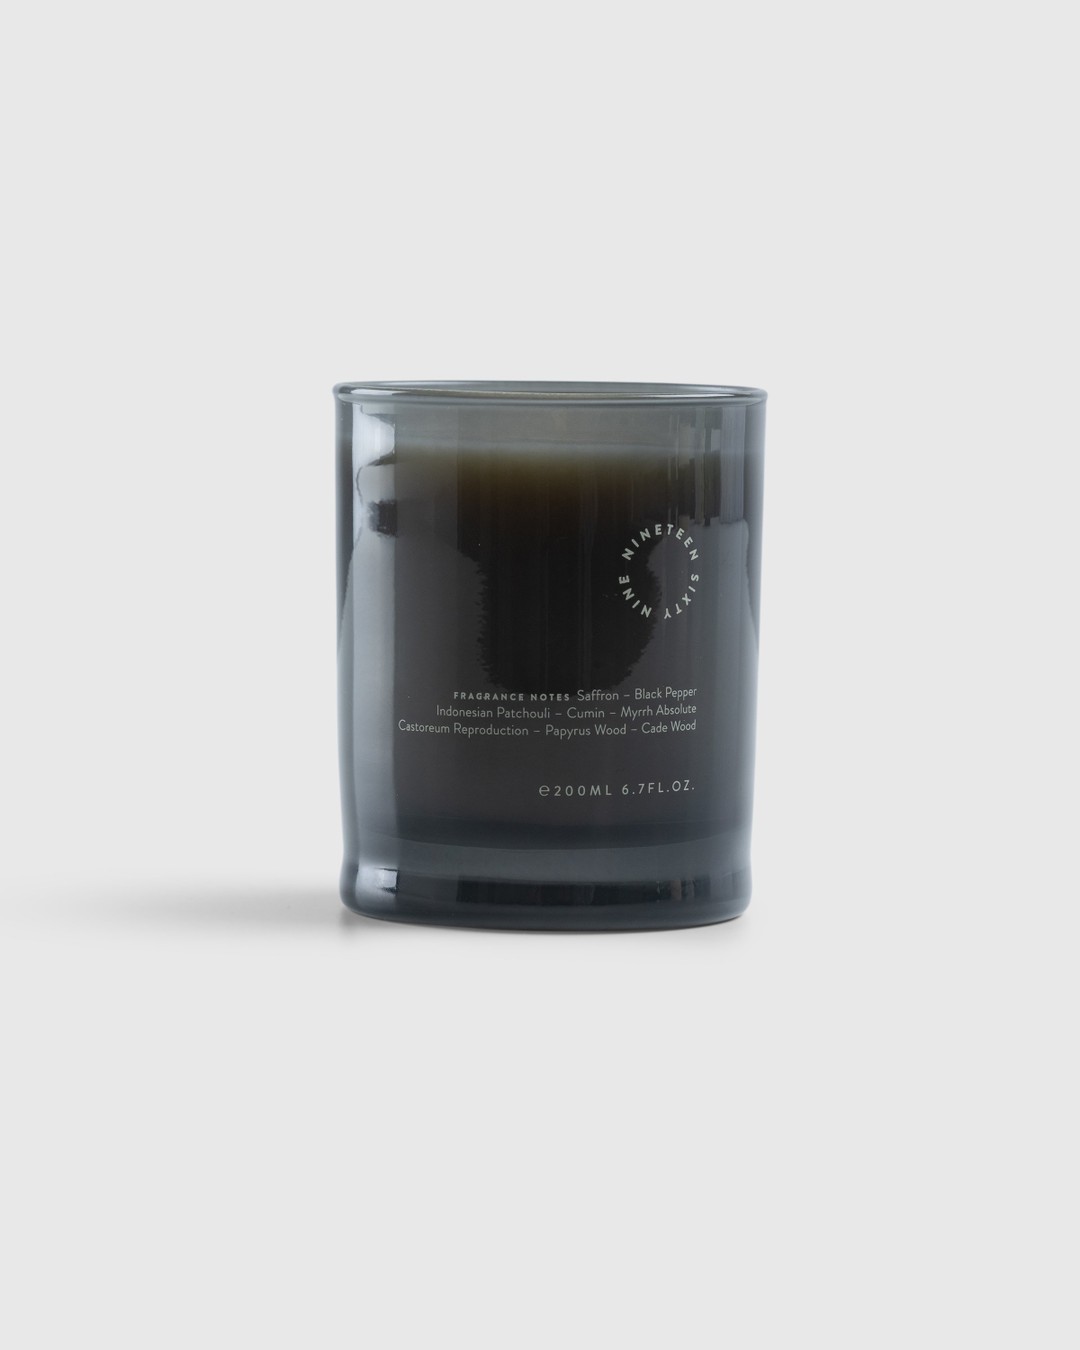 19-69 – Christopher BP Candle - Candles - Grey - Image 2